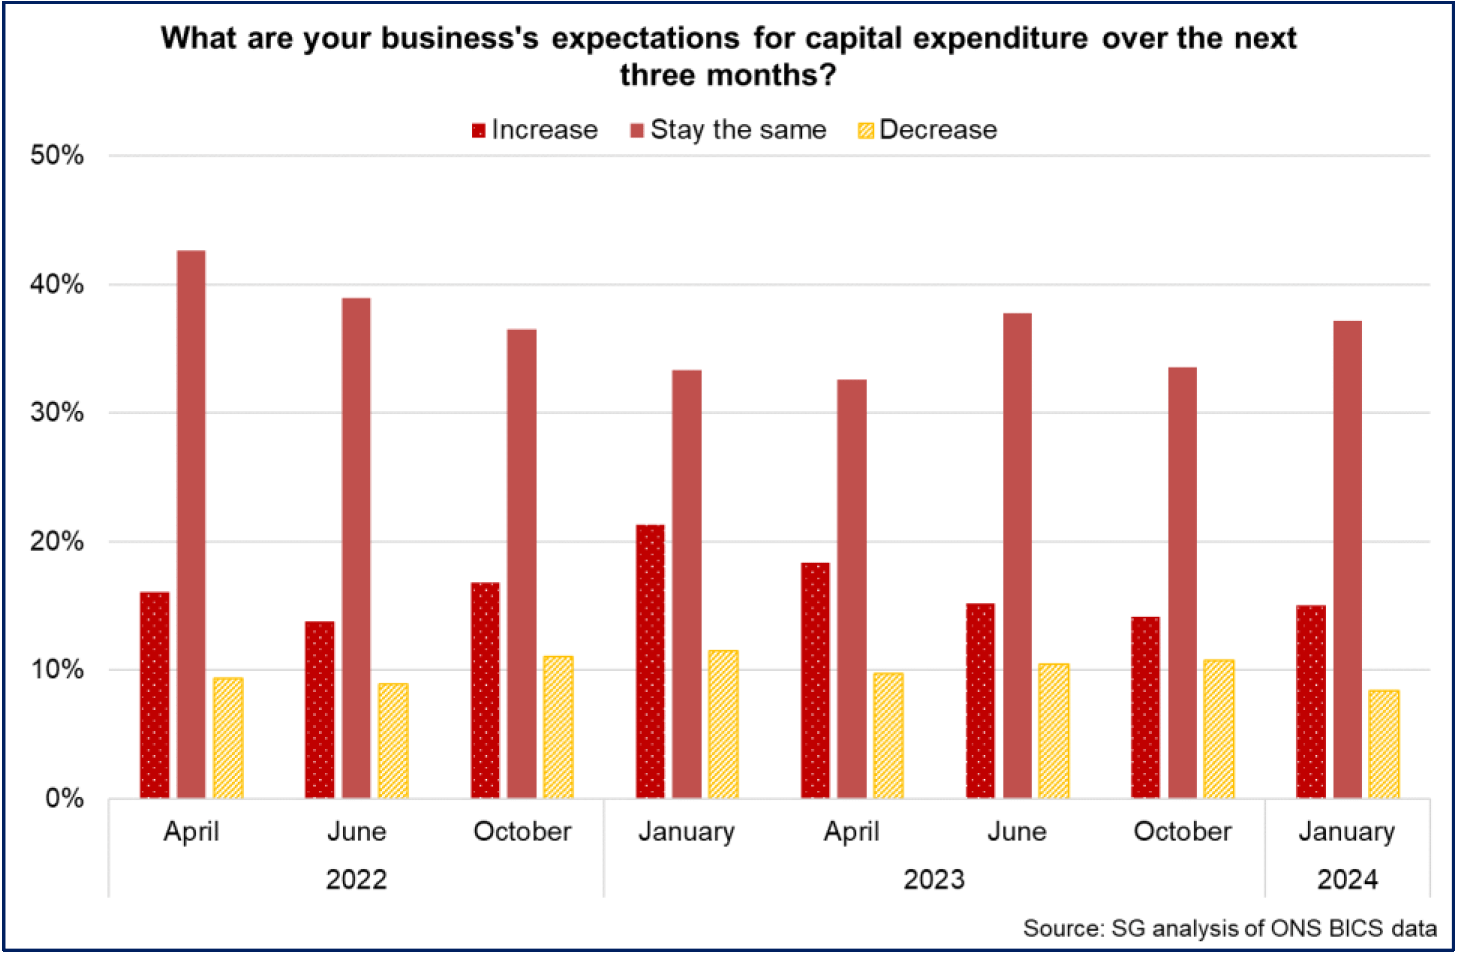 decreasing share of businesses over the past year expect to increase capex while an increasing share expect it to stay the same